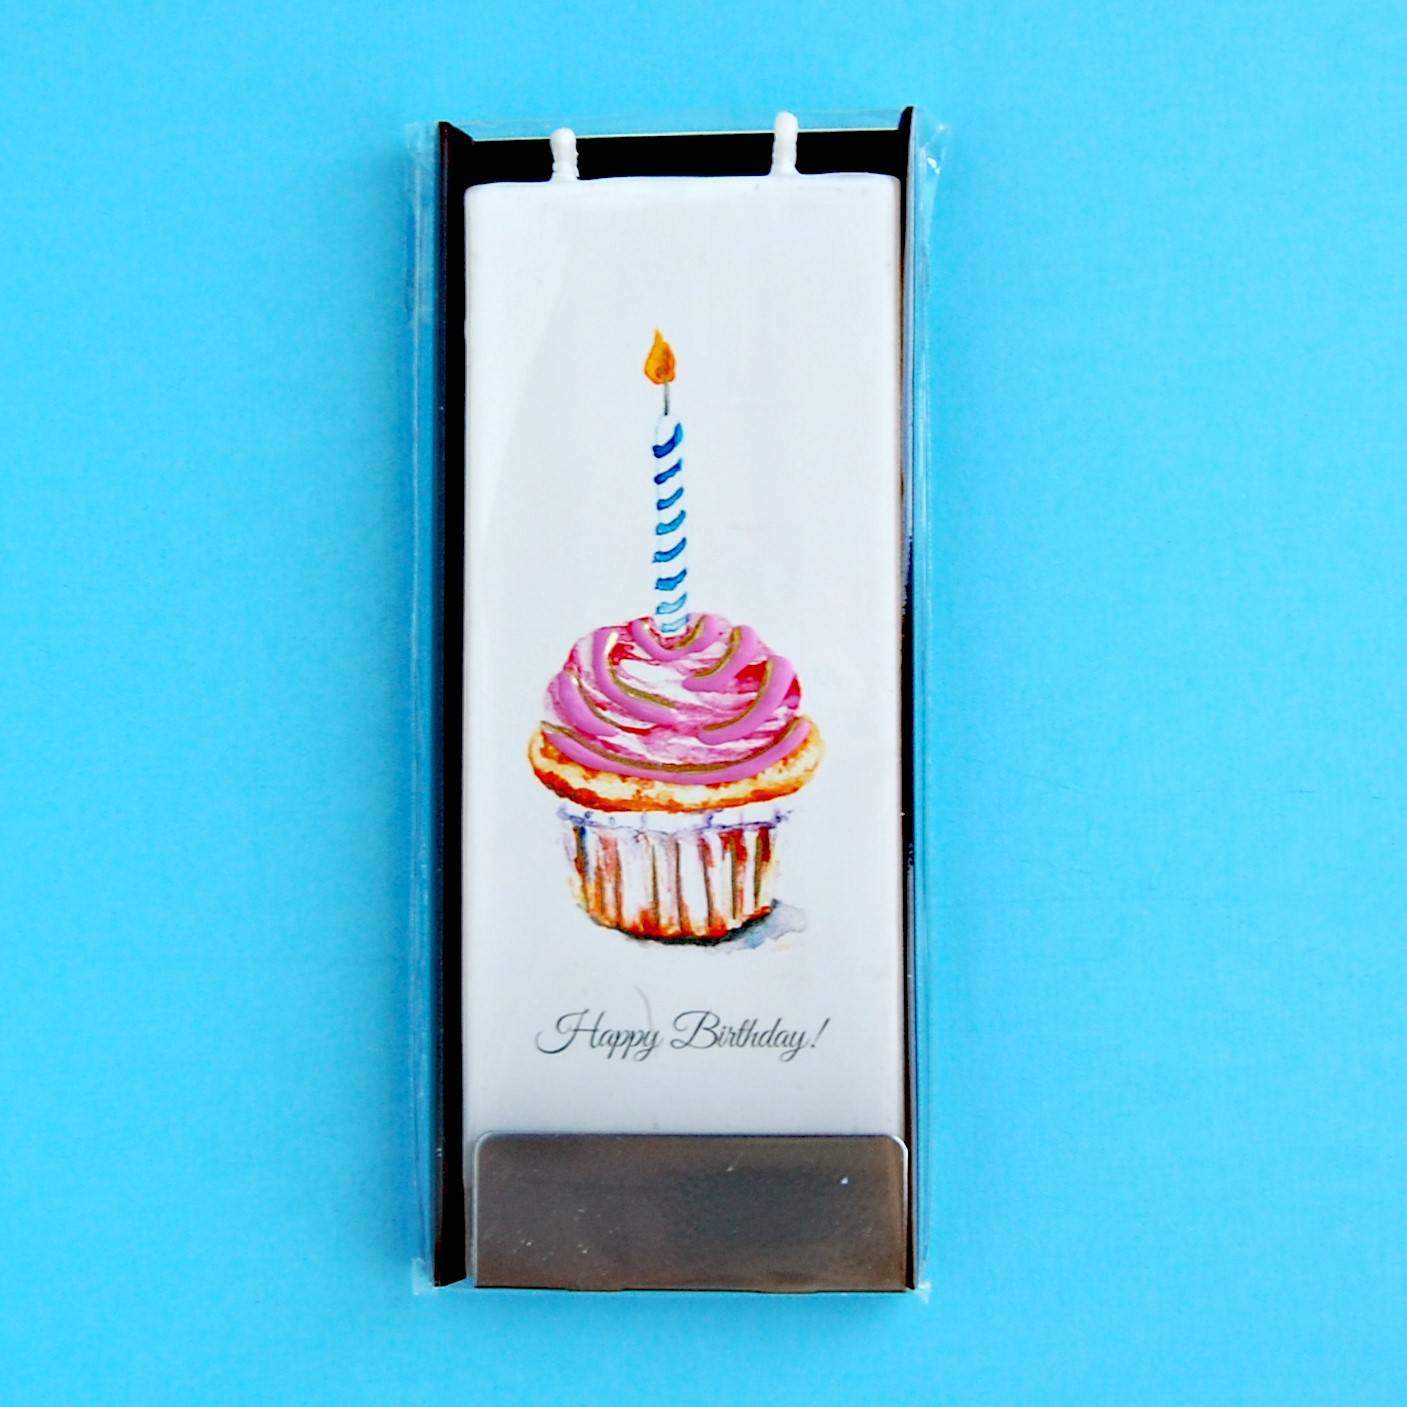 This Happy Birthday Cupcake Flatyz Handmade Twin Wick Unscented Thin Flat Candle is made with love by Premier Homegoods! Shop more unique gift ideas today with Spots Initiatives, the best way to support creators.